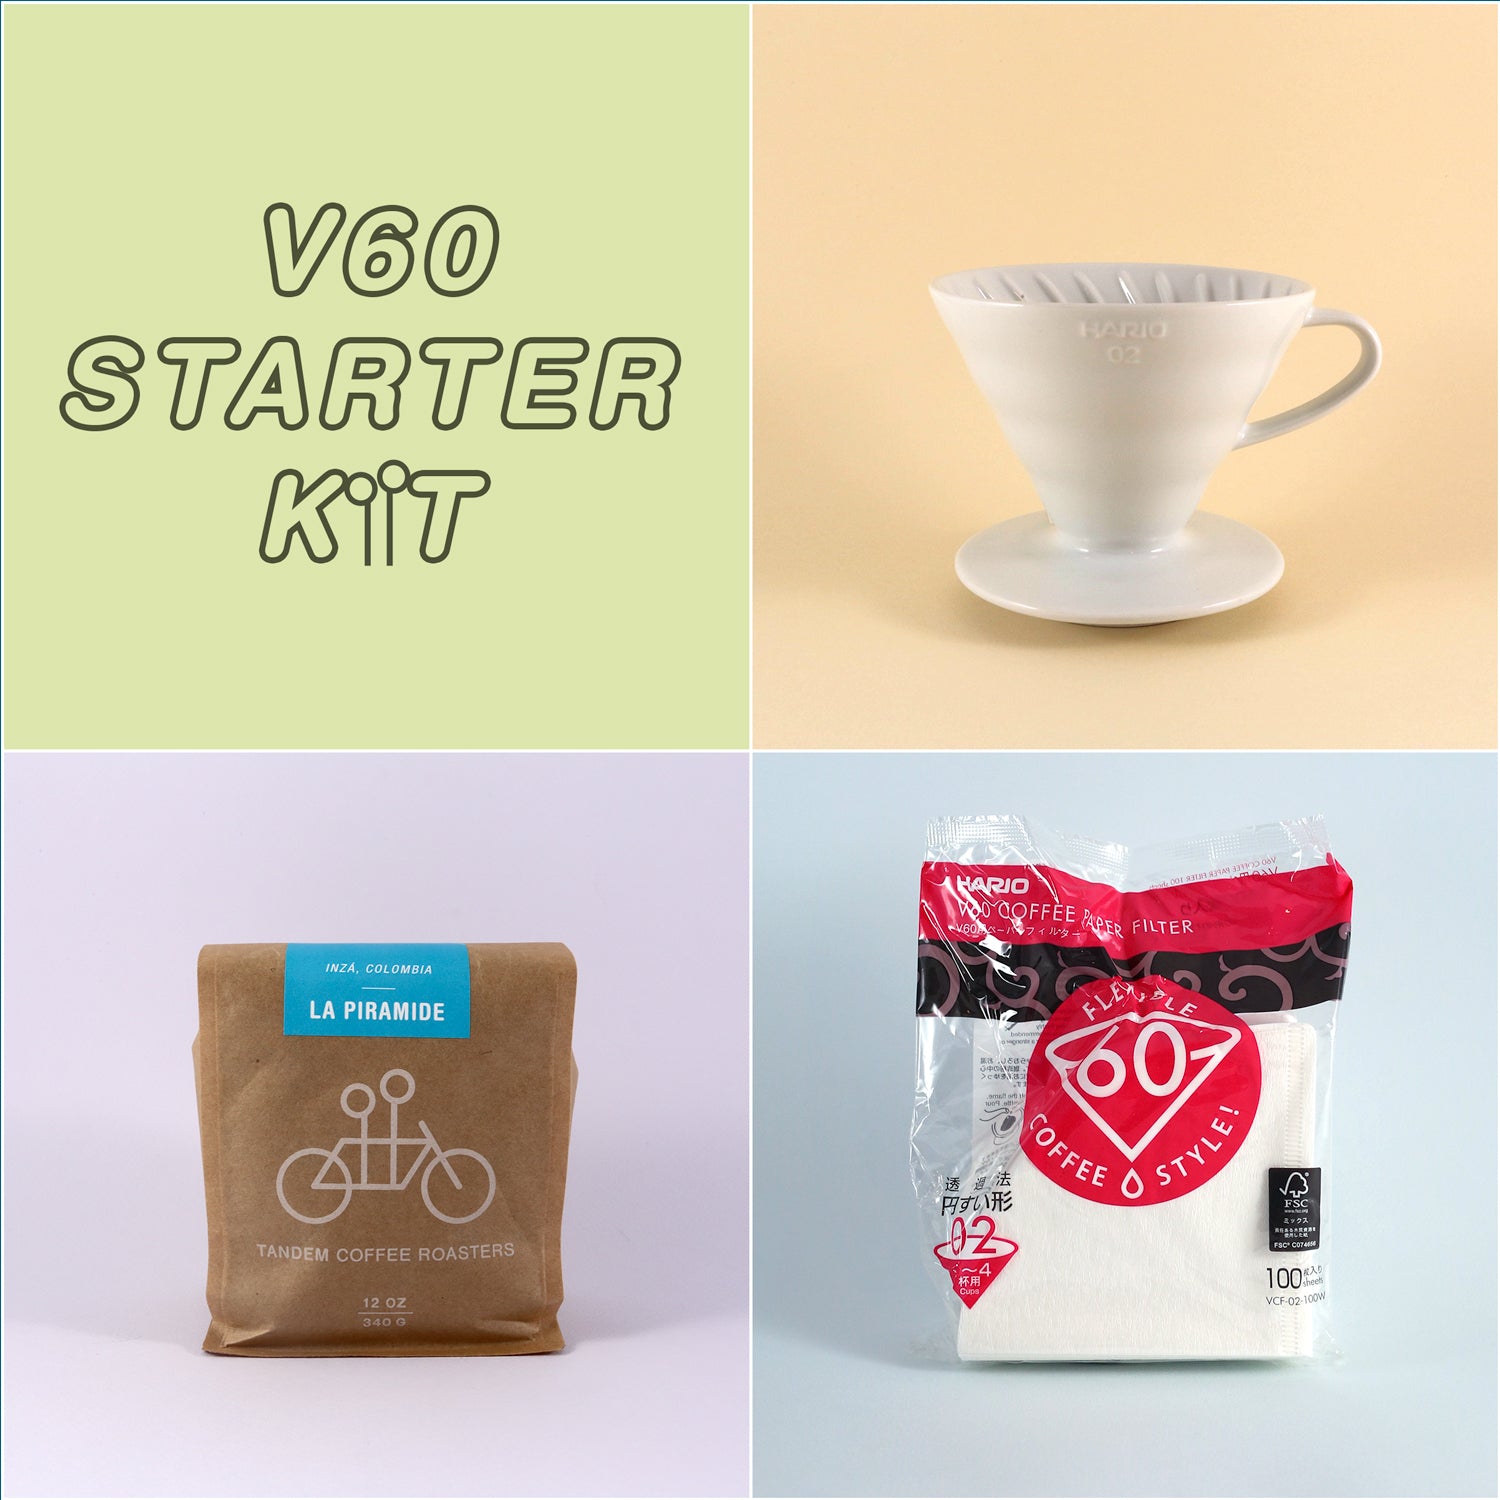 A collage of four images: top left shows "Tandem Coffee Roasters V60 Starter Kit" text, top right displays a white Hario V60 coffee driaper on a cup, bottom left features a bag of freshly.